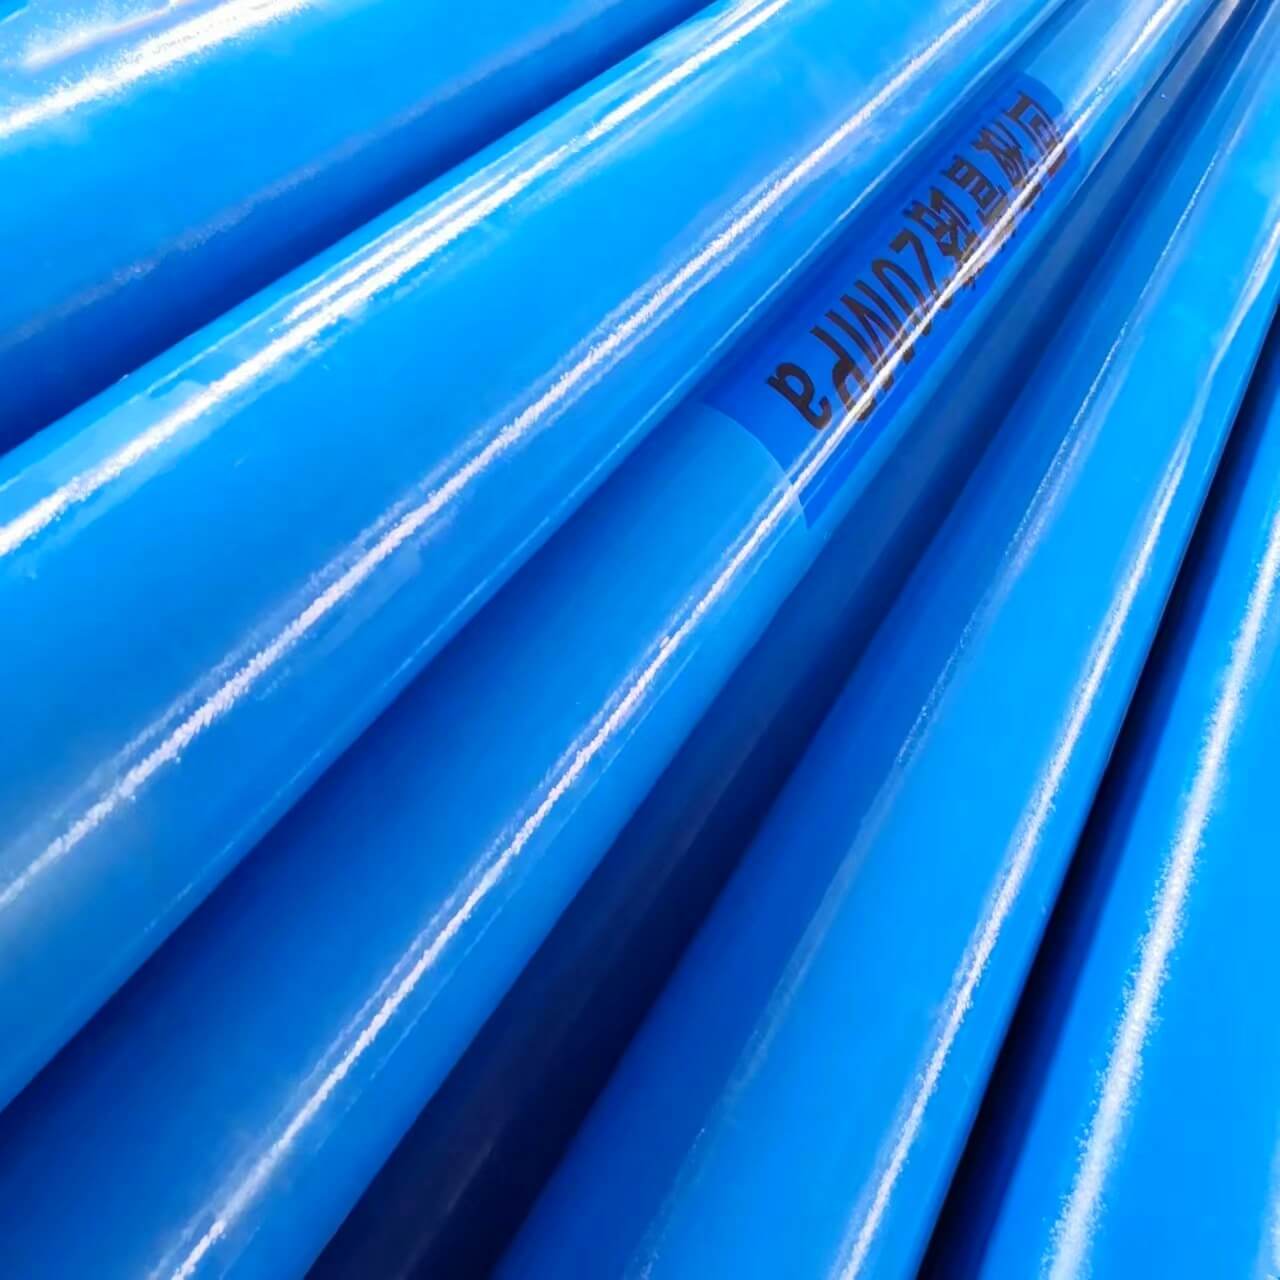 Lined with Stainless Steel Corrosion Resistant Composite Steel Pipe